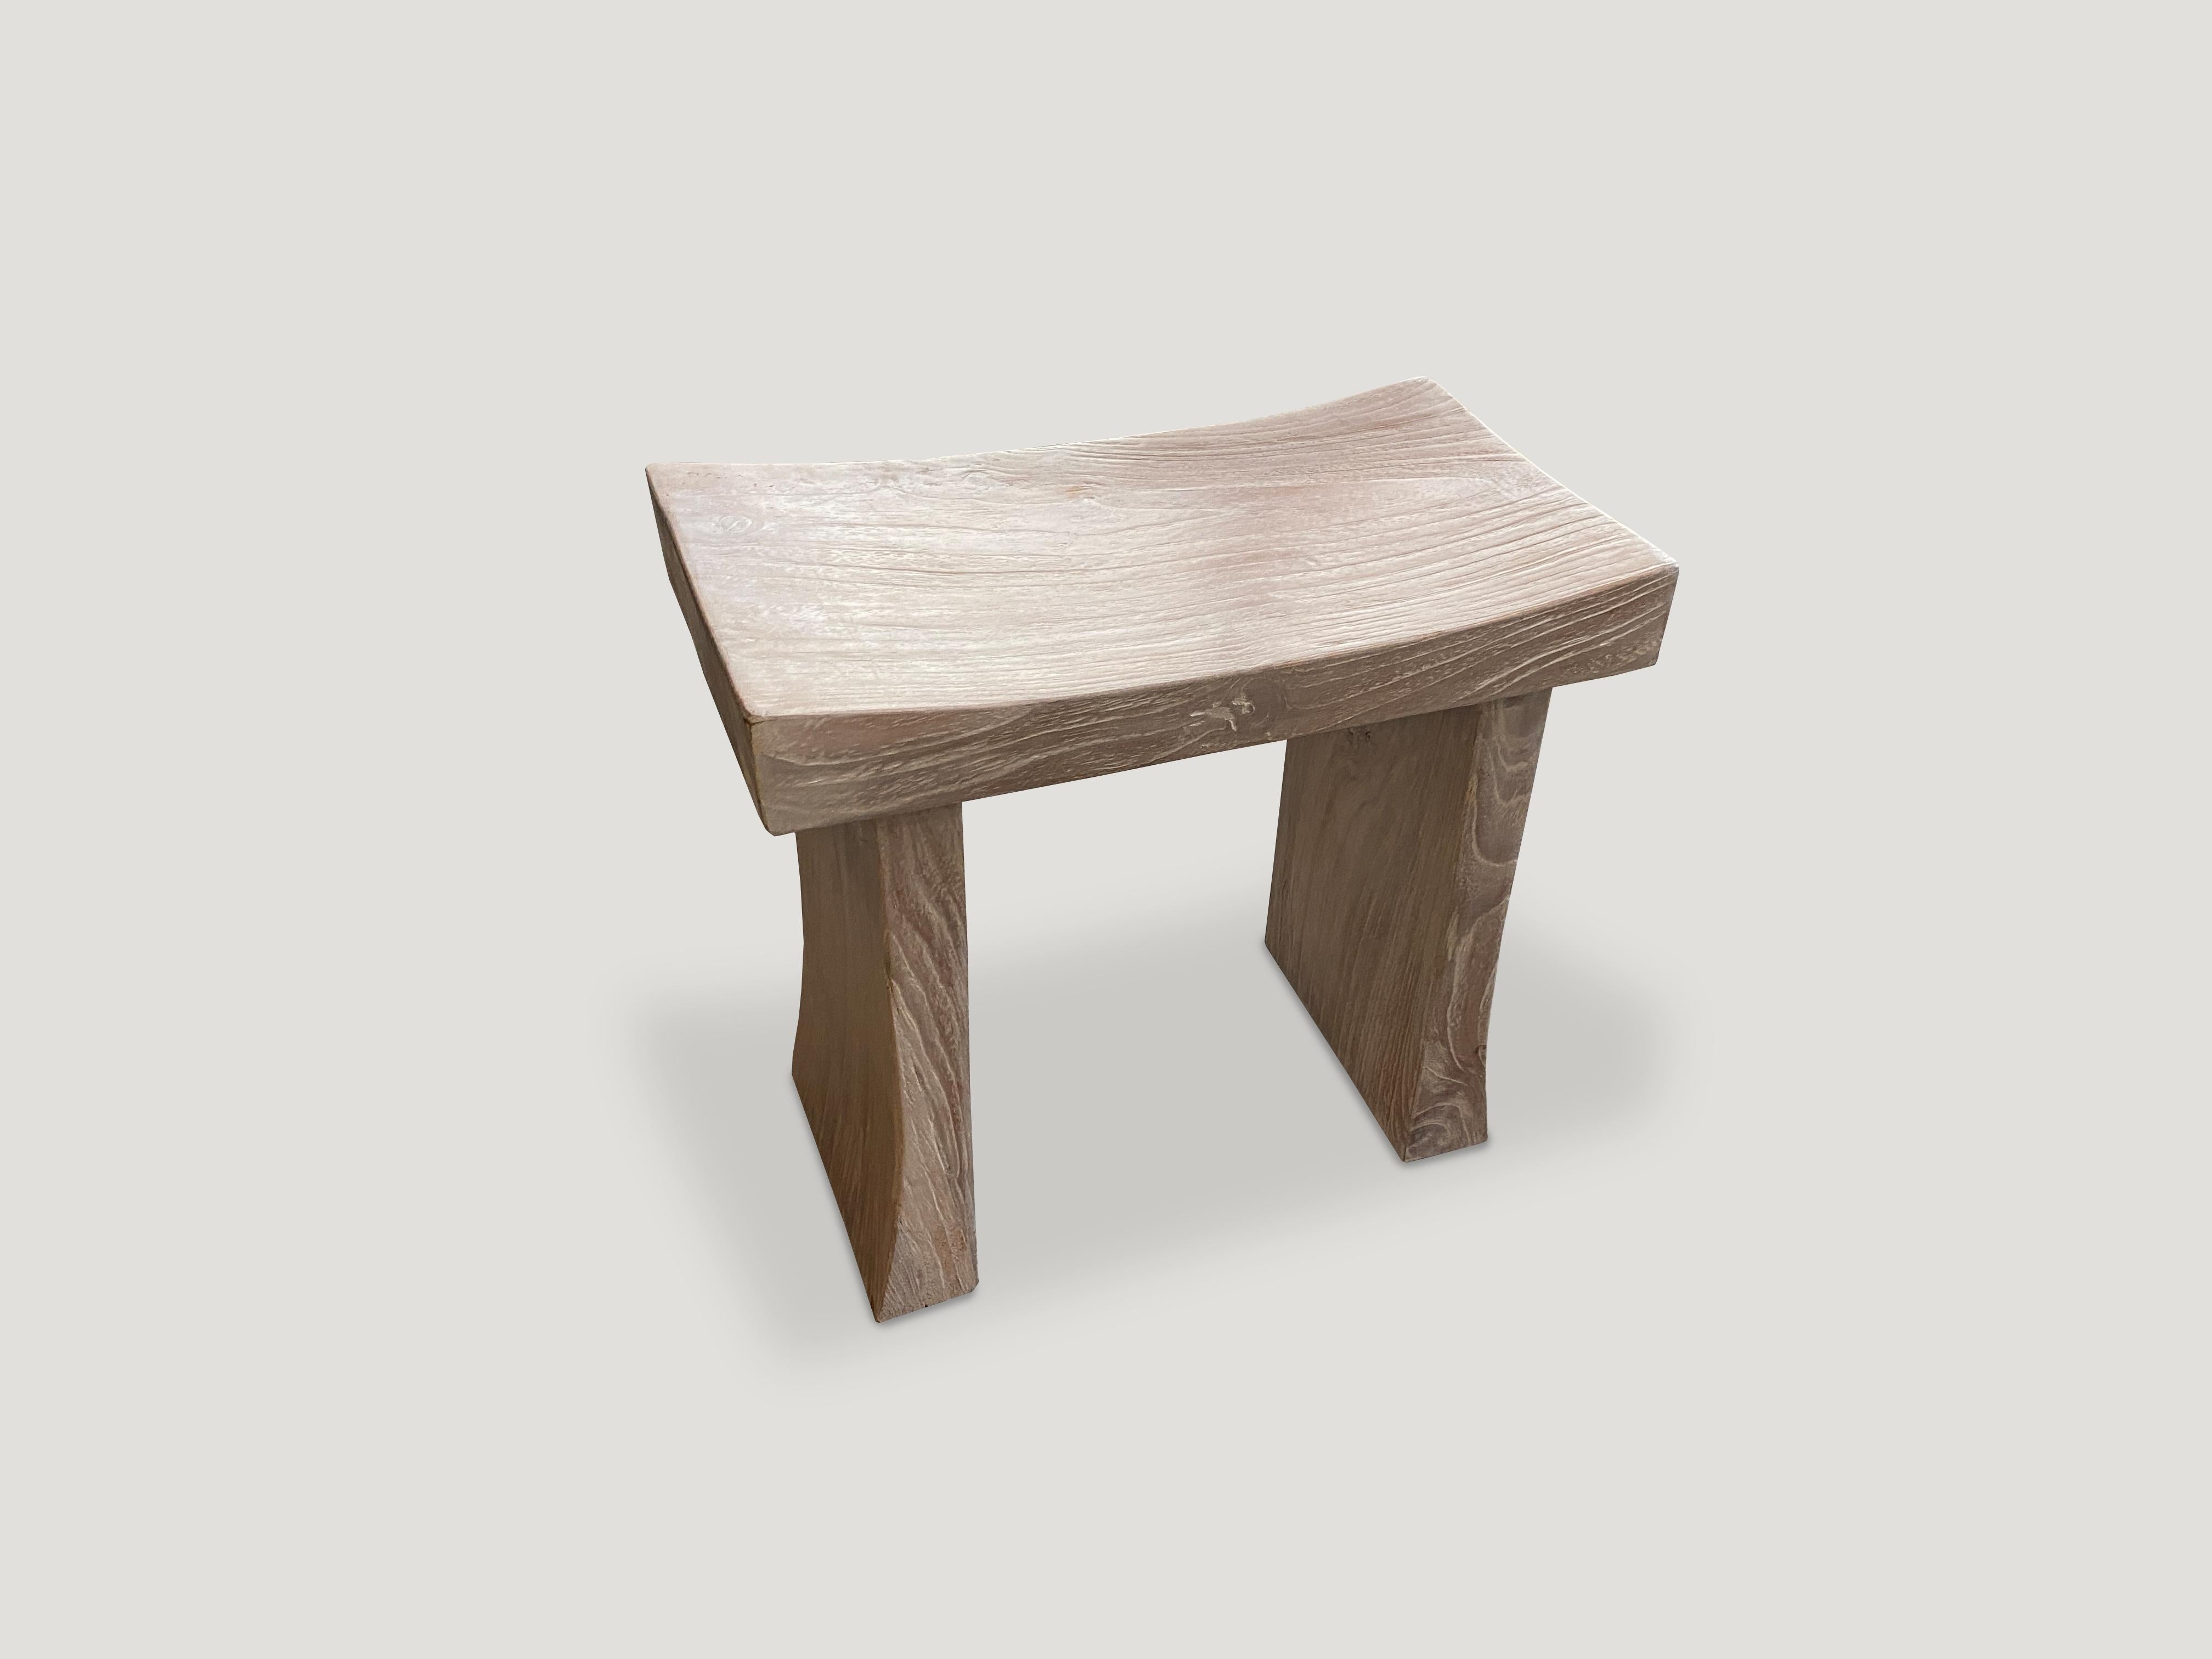 Sleek minimalist bench. Hand made from a two and a half thick single slab of reclaimed teak and finished with a white wash, revealing the grain of the wood. Custom sizes and stains available.

The St. Barts Collection features an exciting new line